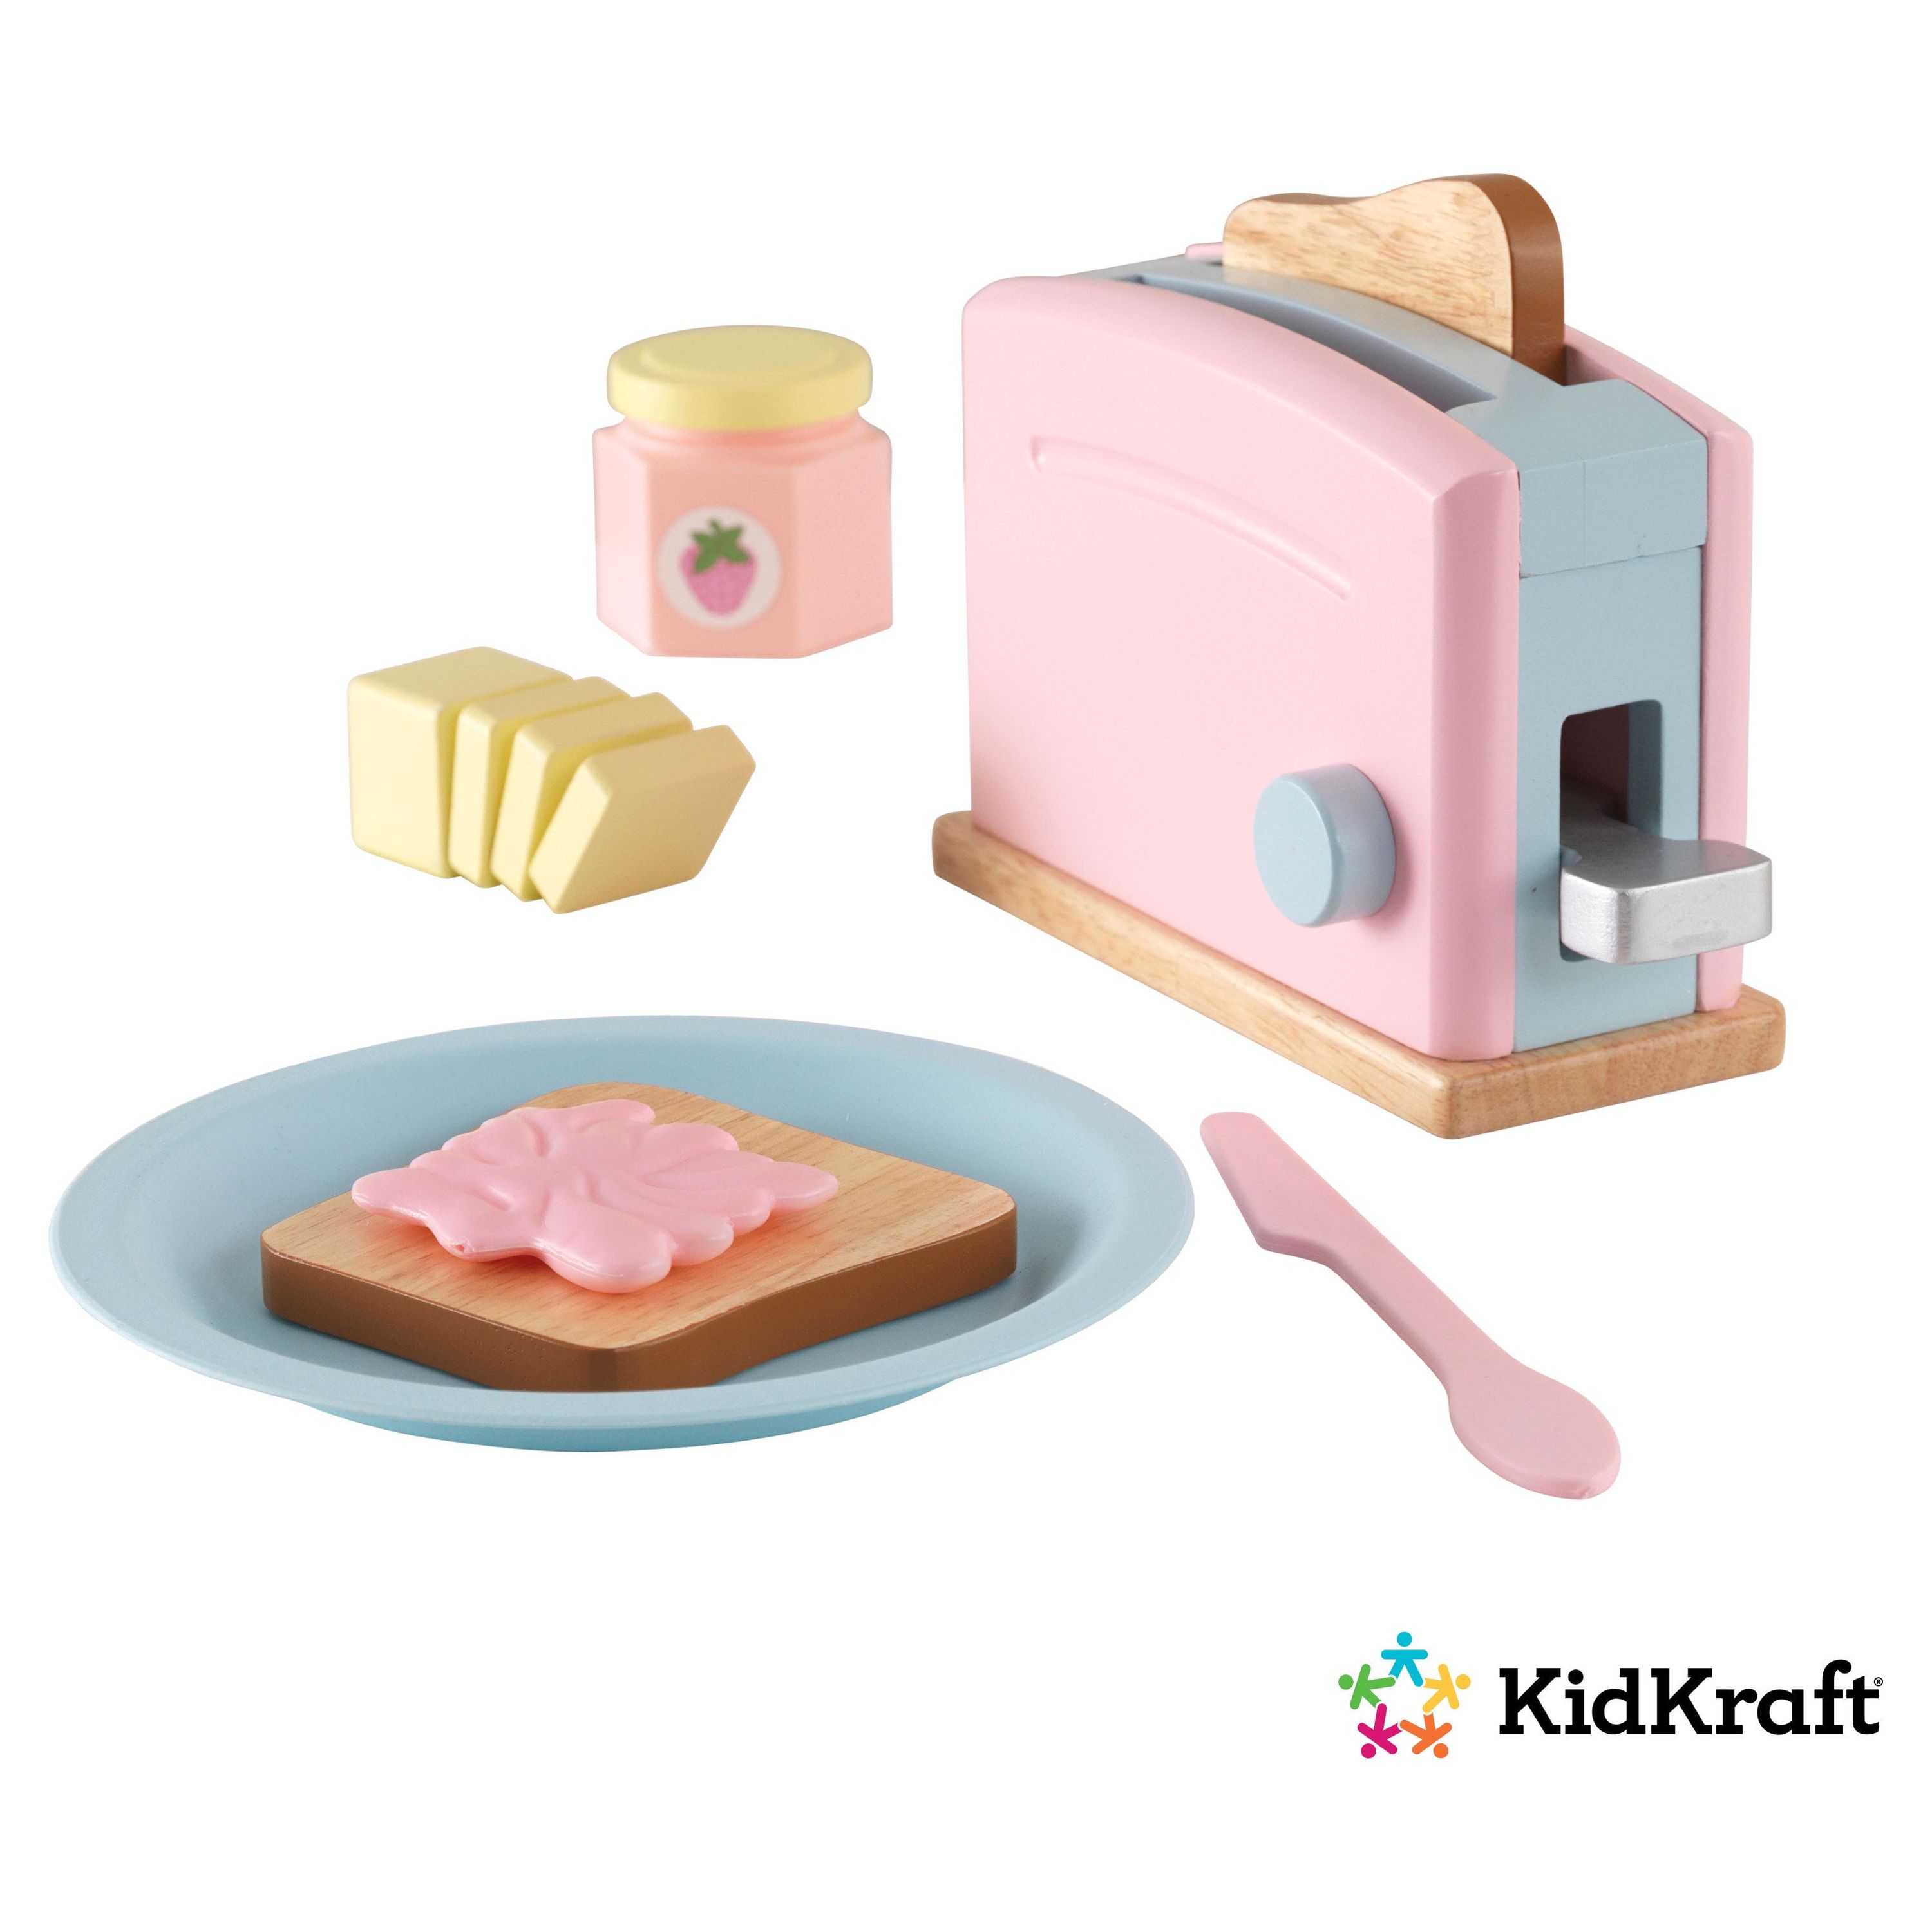 KidKraft Wooden Toaster Playset with 8 Pieces, Kitchen Toy - Pastel - image 3 of 3